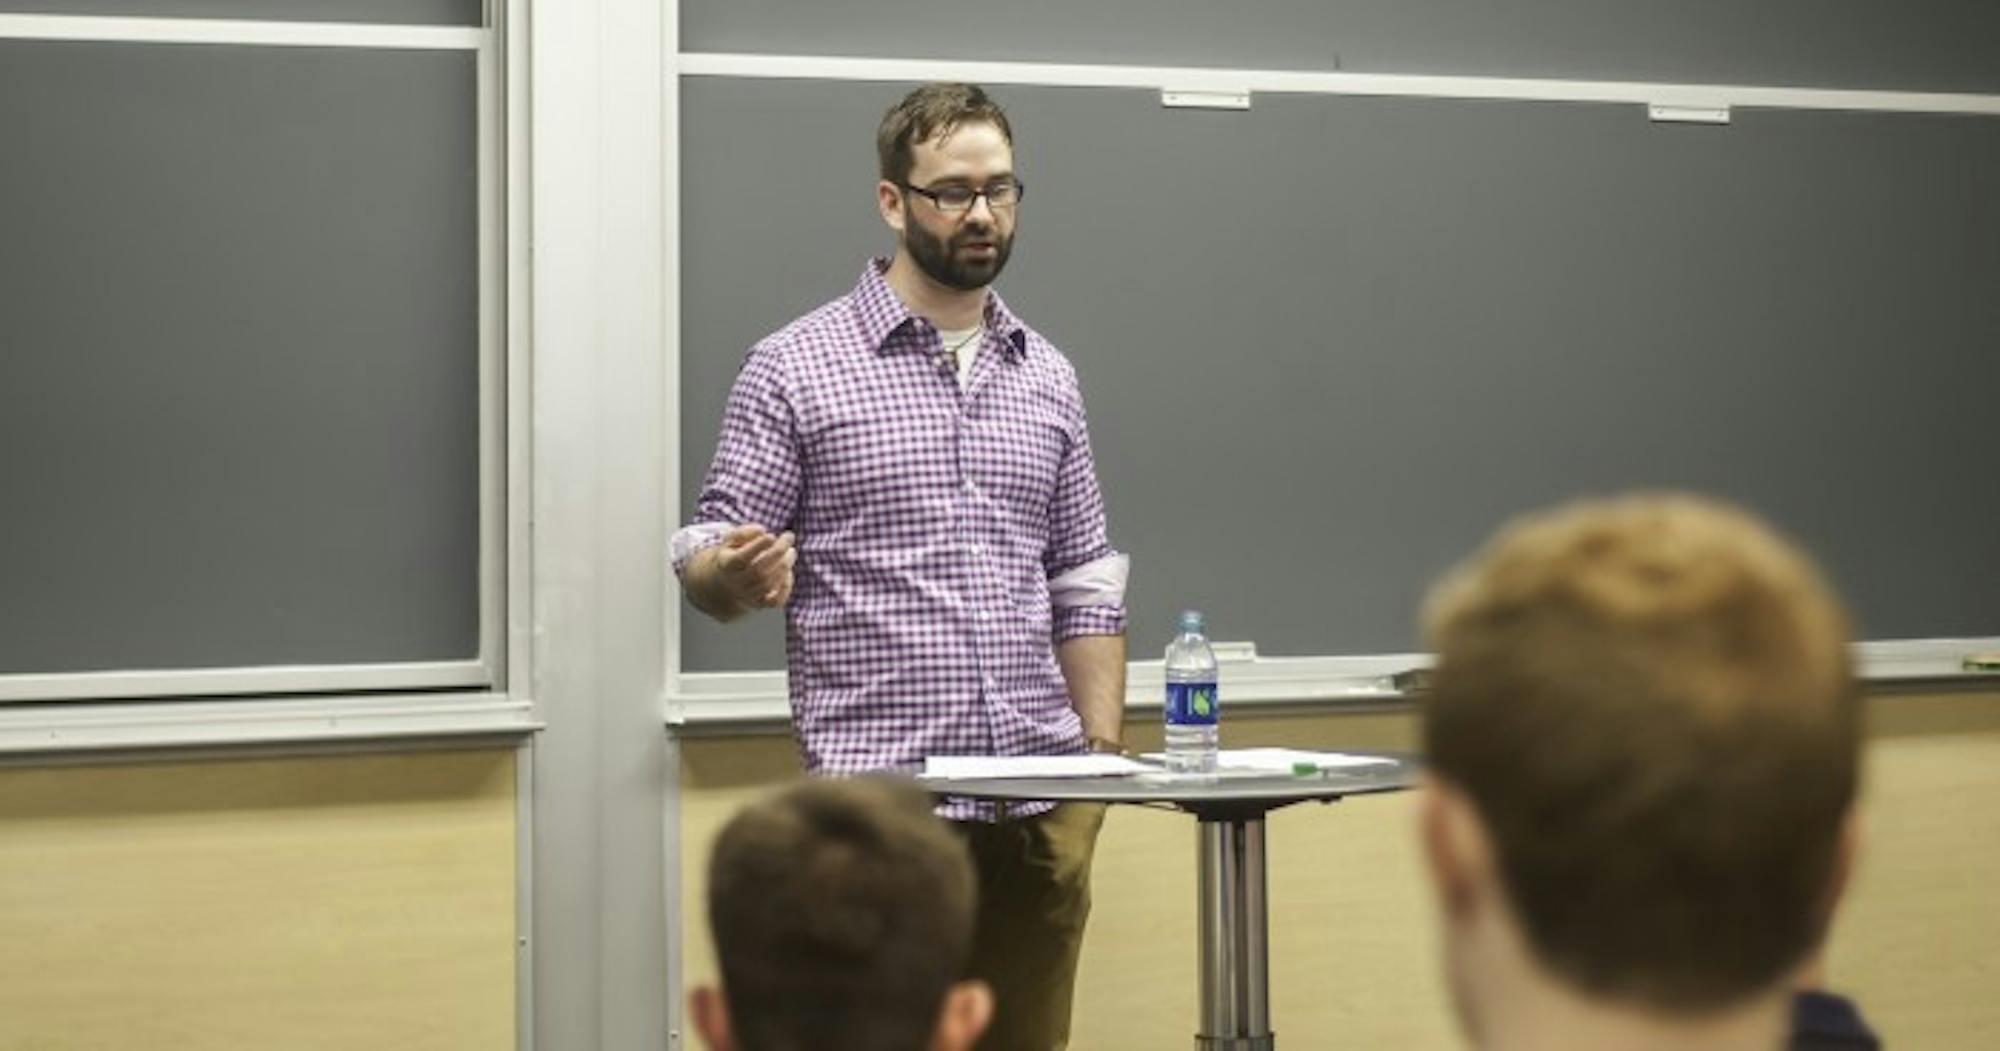 Matt Walsh, a columnist for the Blaze, discussed the impact of liberalism on Catholicism Tuesday evening.